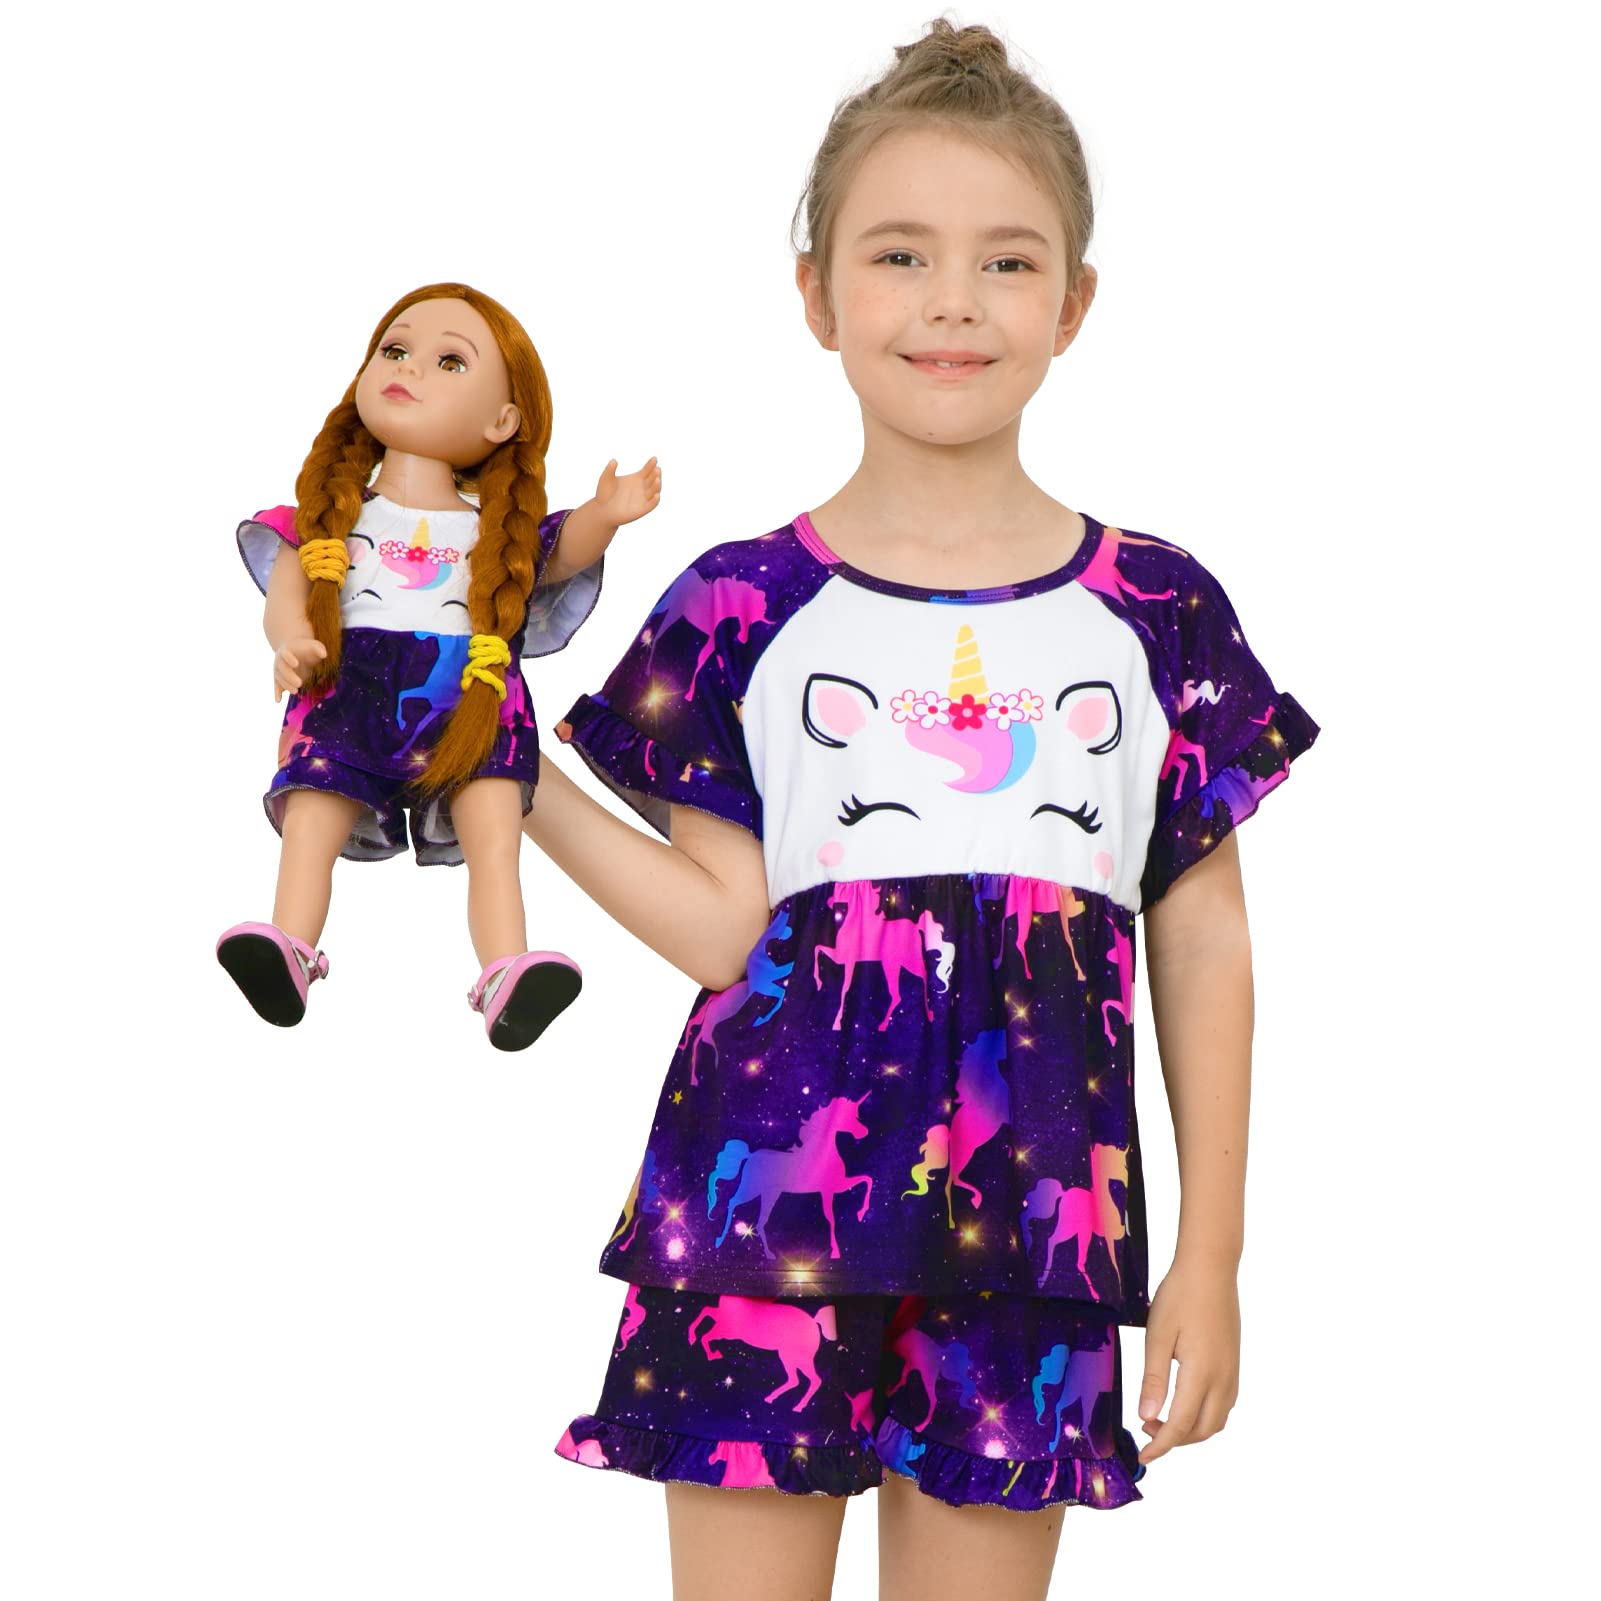 Play Tailor Girl  Doll Matching Pajamas Unicorn Outfit Clothes For Girls And 18 Dolls Pajama Sets (Doll Not Included), Dark Purple, 3-4T